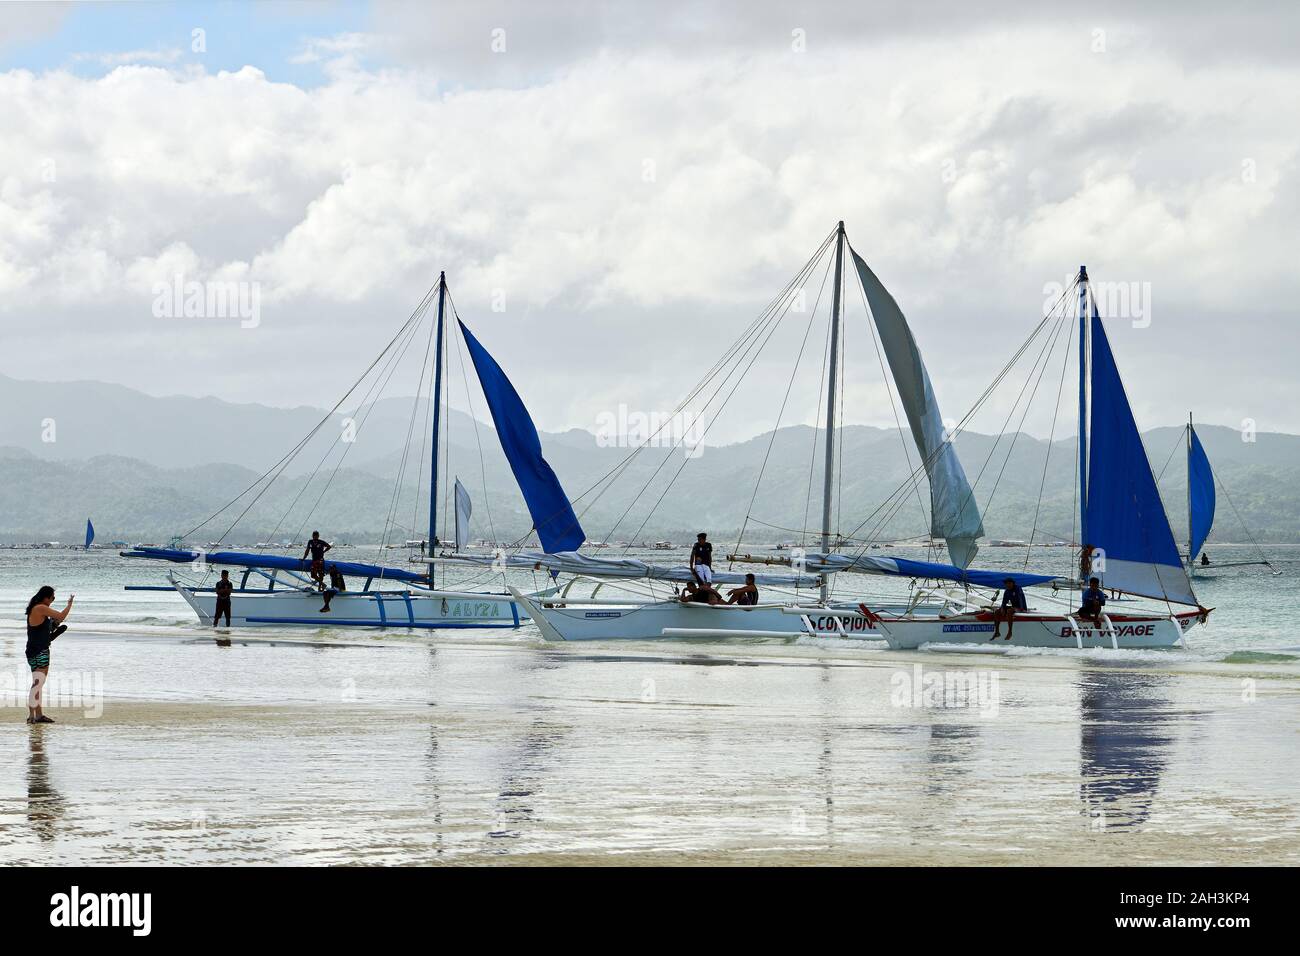 Boracay, Aklan Province, Philippines - January 3, 2019: Sailboats parking along the White Beach with sails down because of bad weather conditions Stock Photo